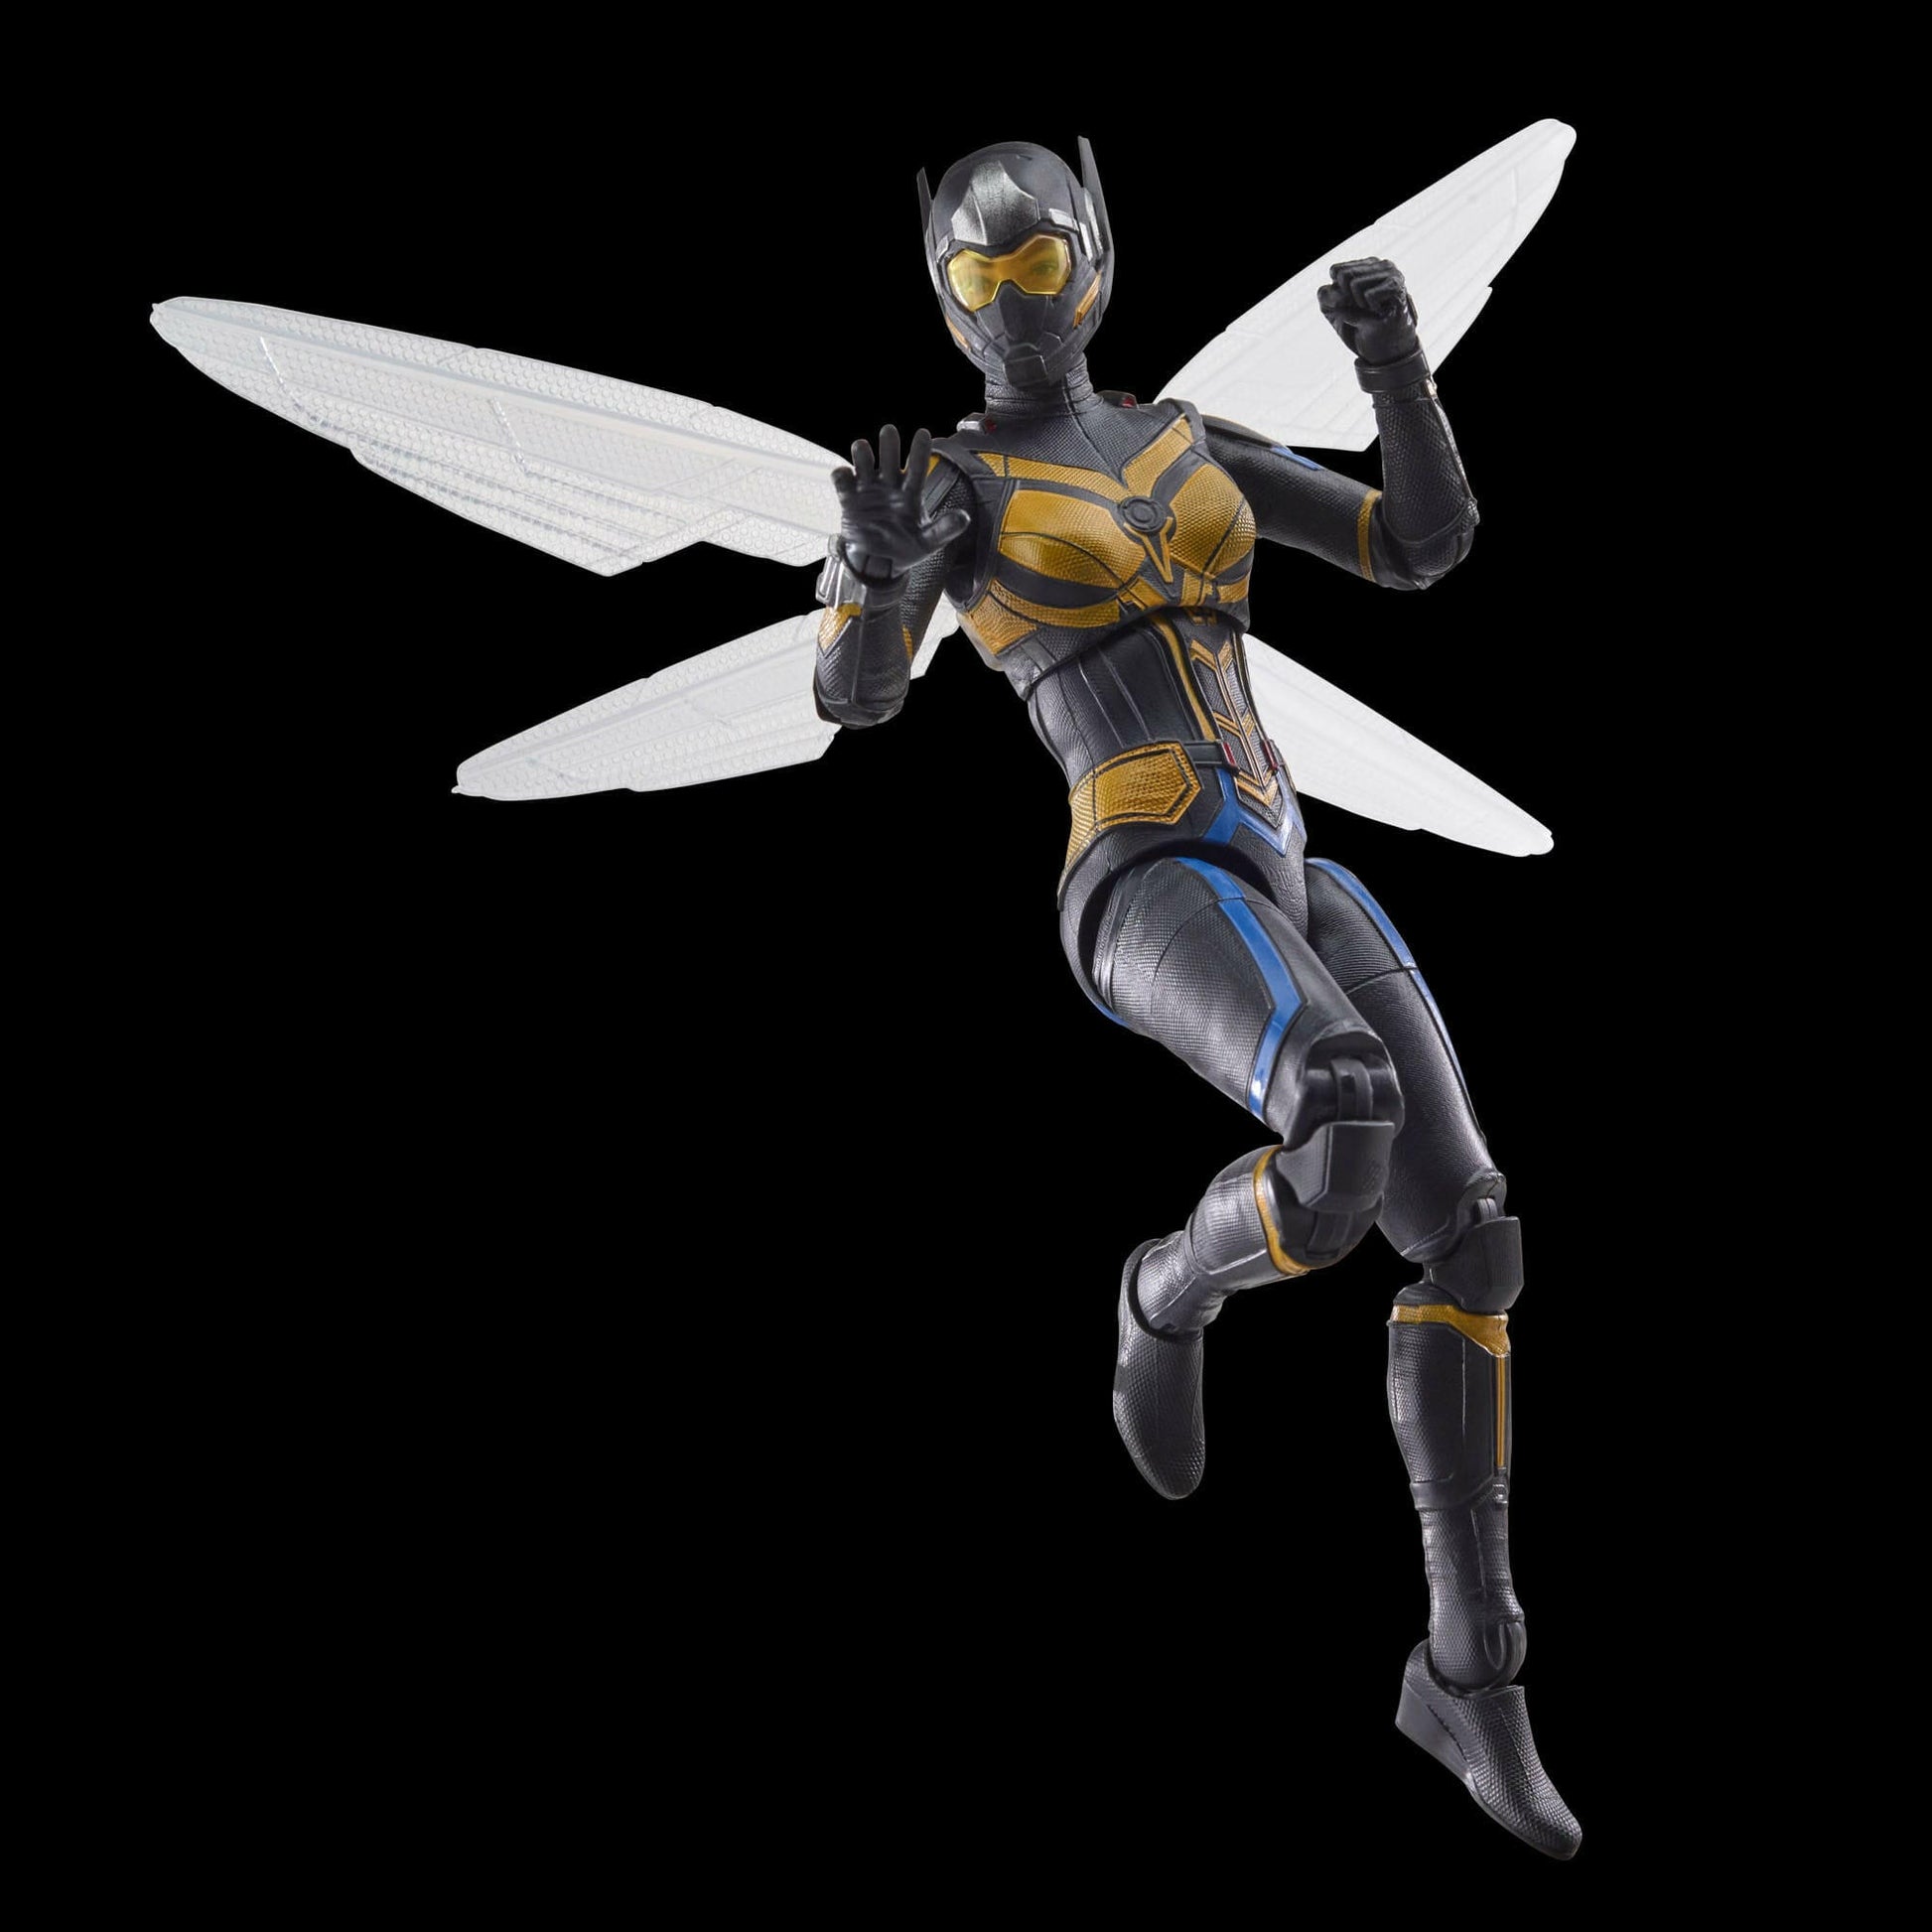 Marvel Legends Ant-Man and the Wasp: Quantumania Actionfigur BAF: Cassie Lang Marvel's Wasp 15cm Hasbro